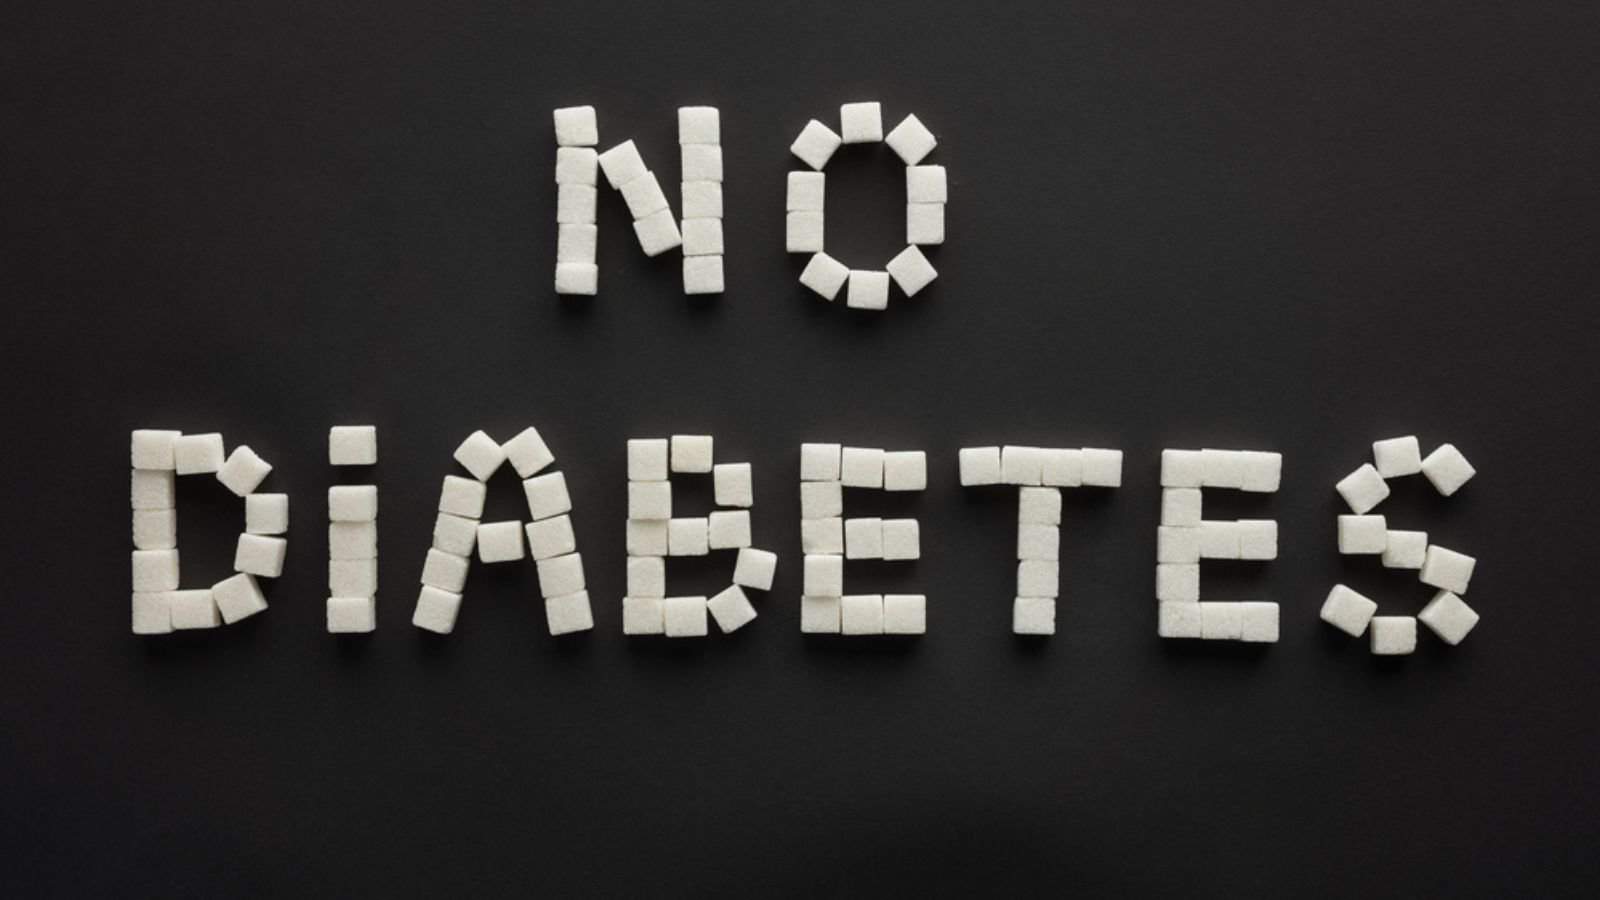 Top view of "no diabetes" lettering made of sugar cubes